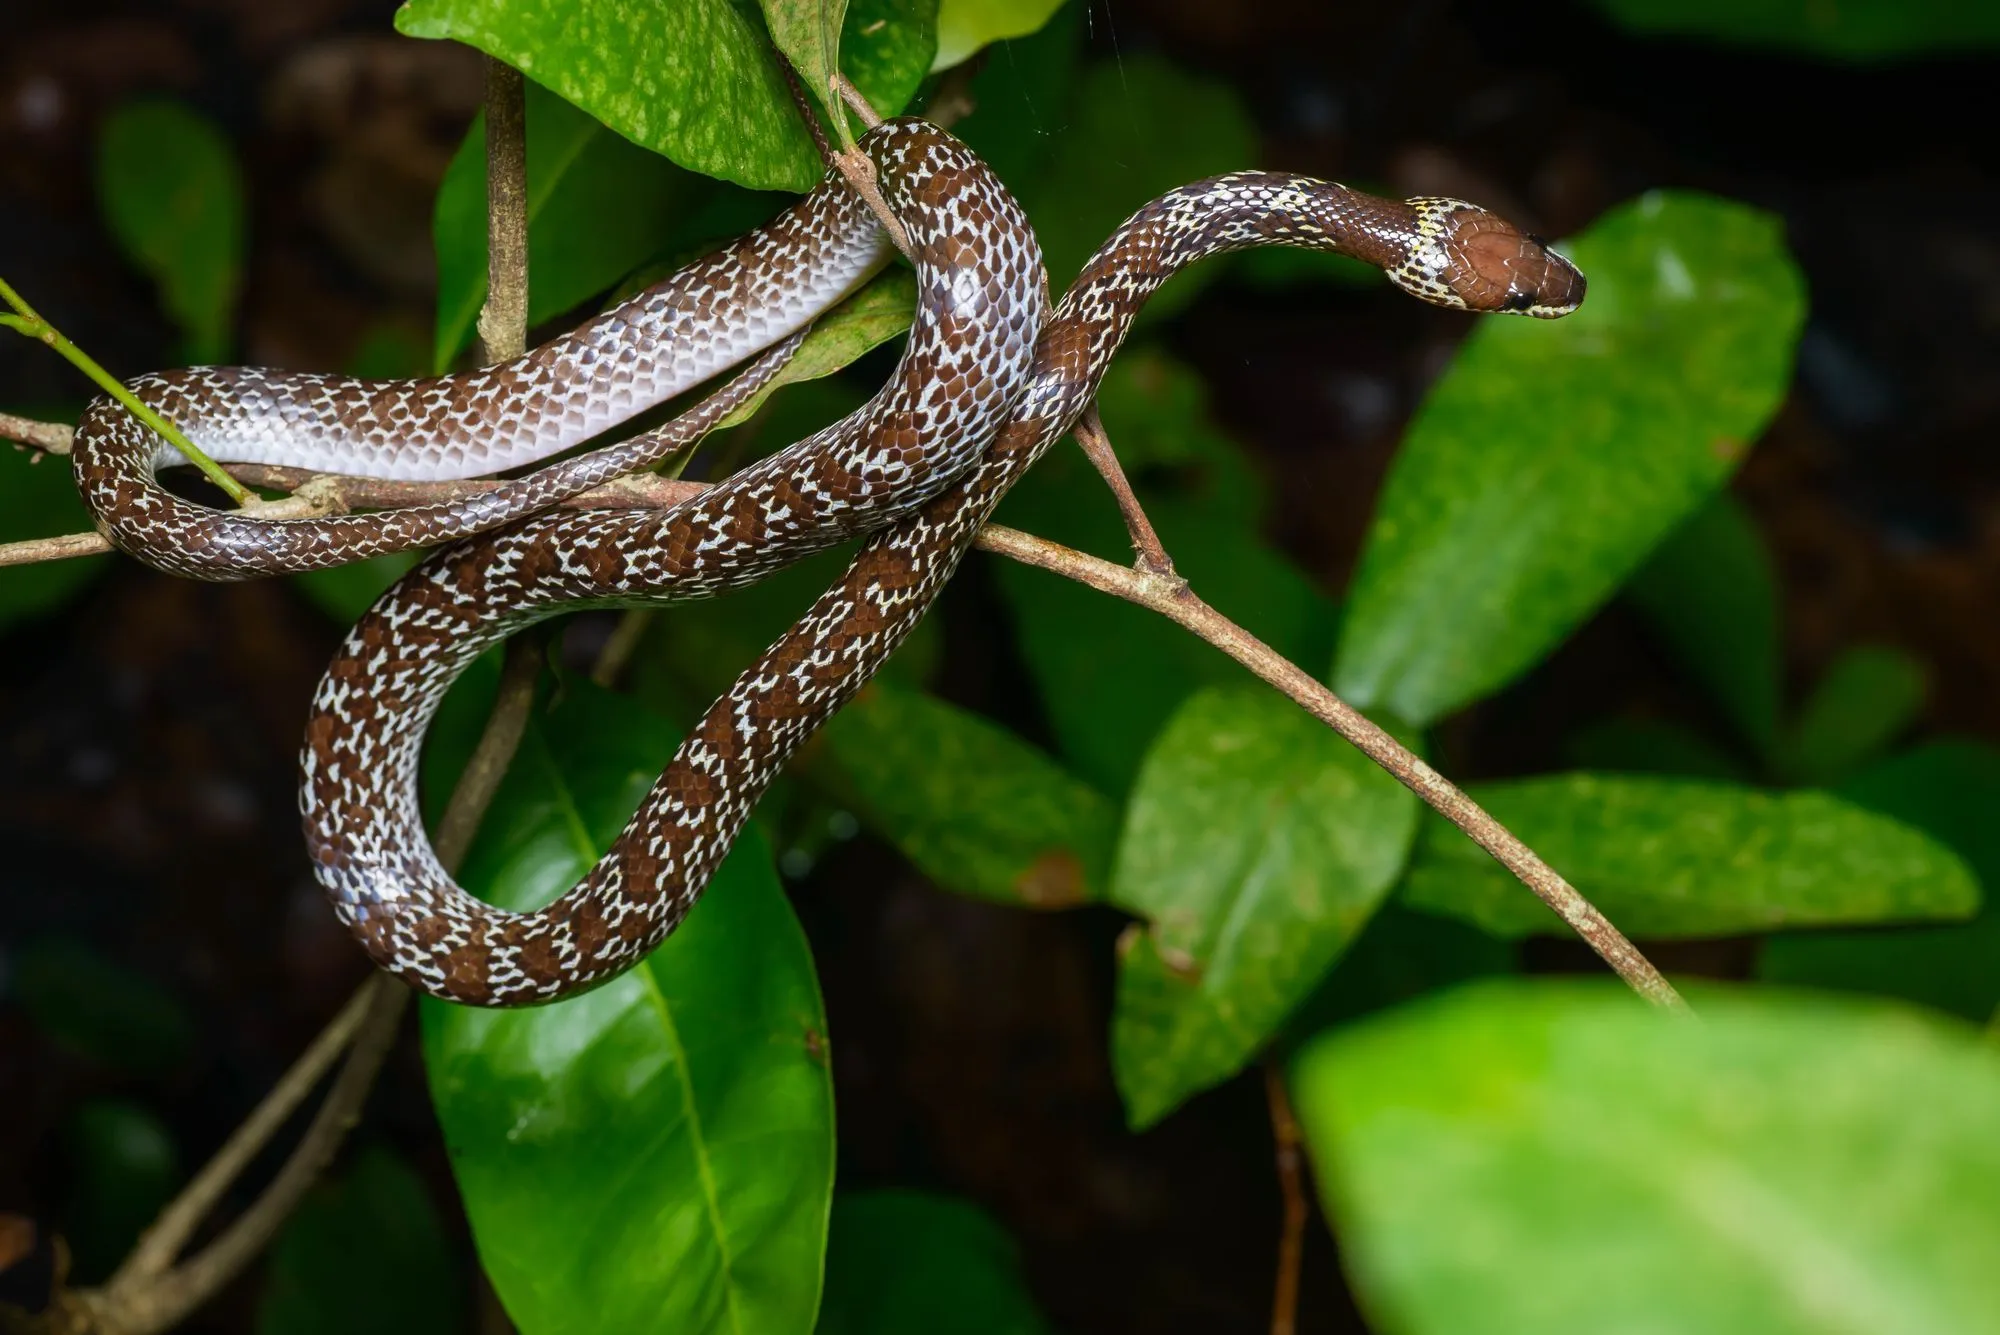 Discover fun common wolf snake facts here and learn more about this wonderful yet mysterious reptile.